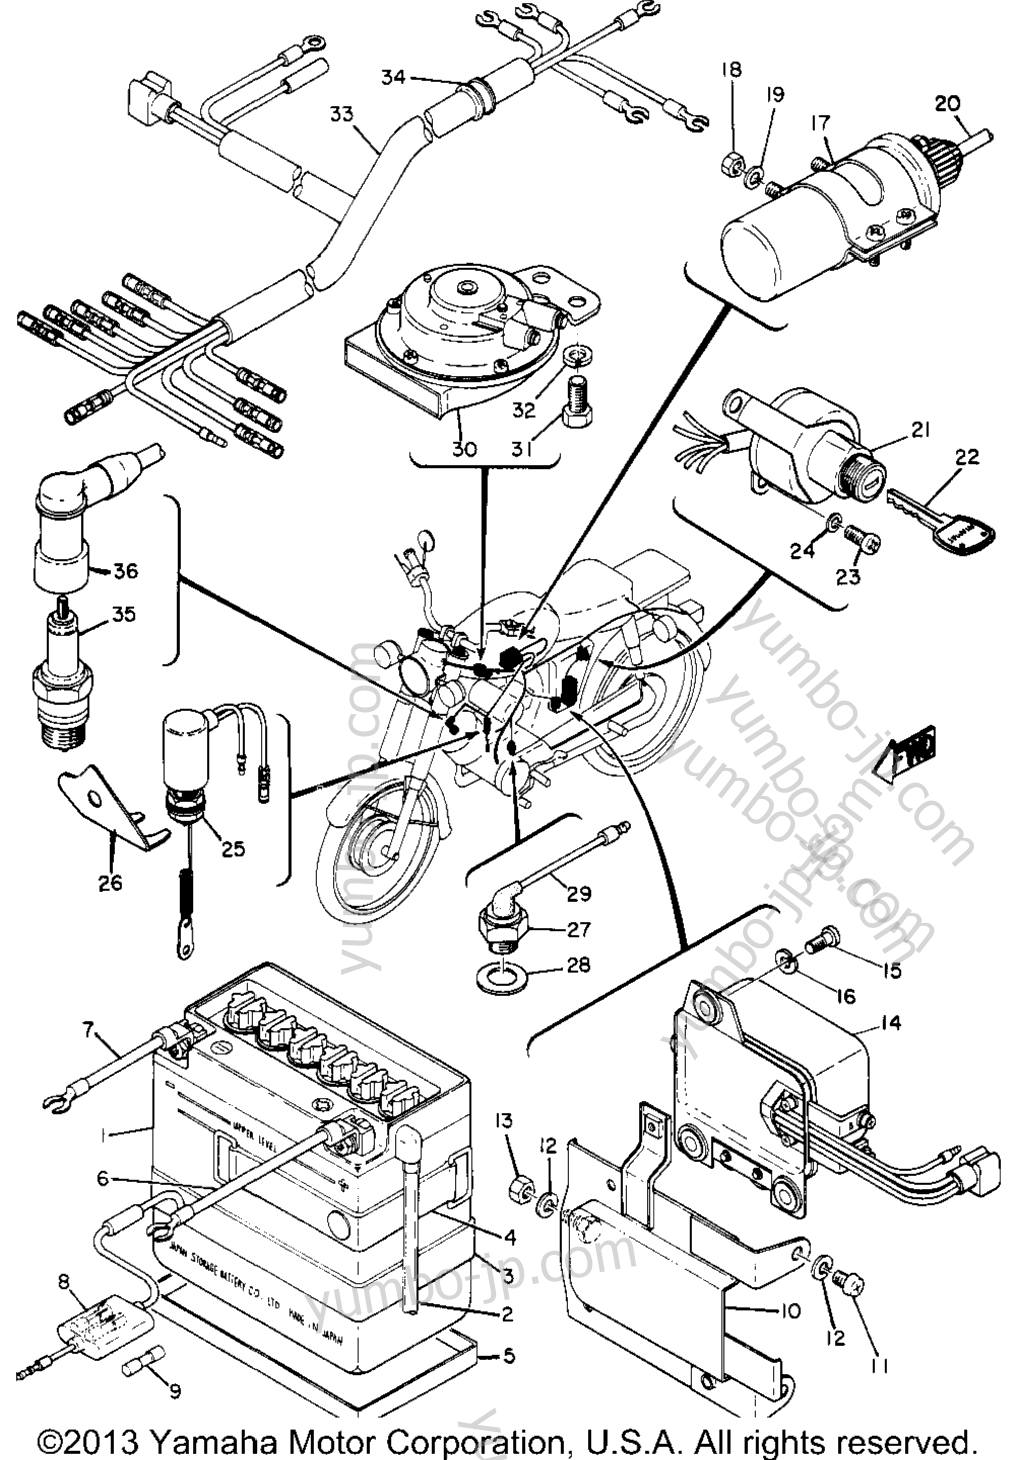 Electrical for motorcycles YAMAHA L5T 1969 year